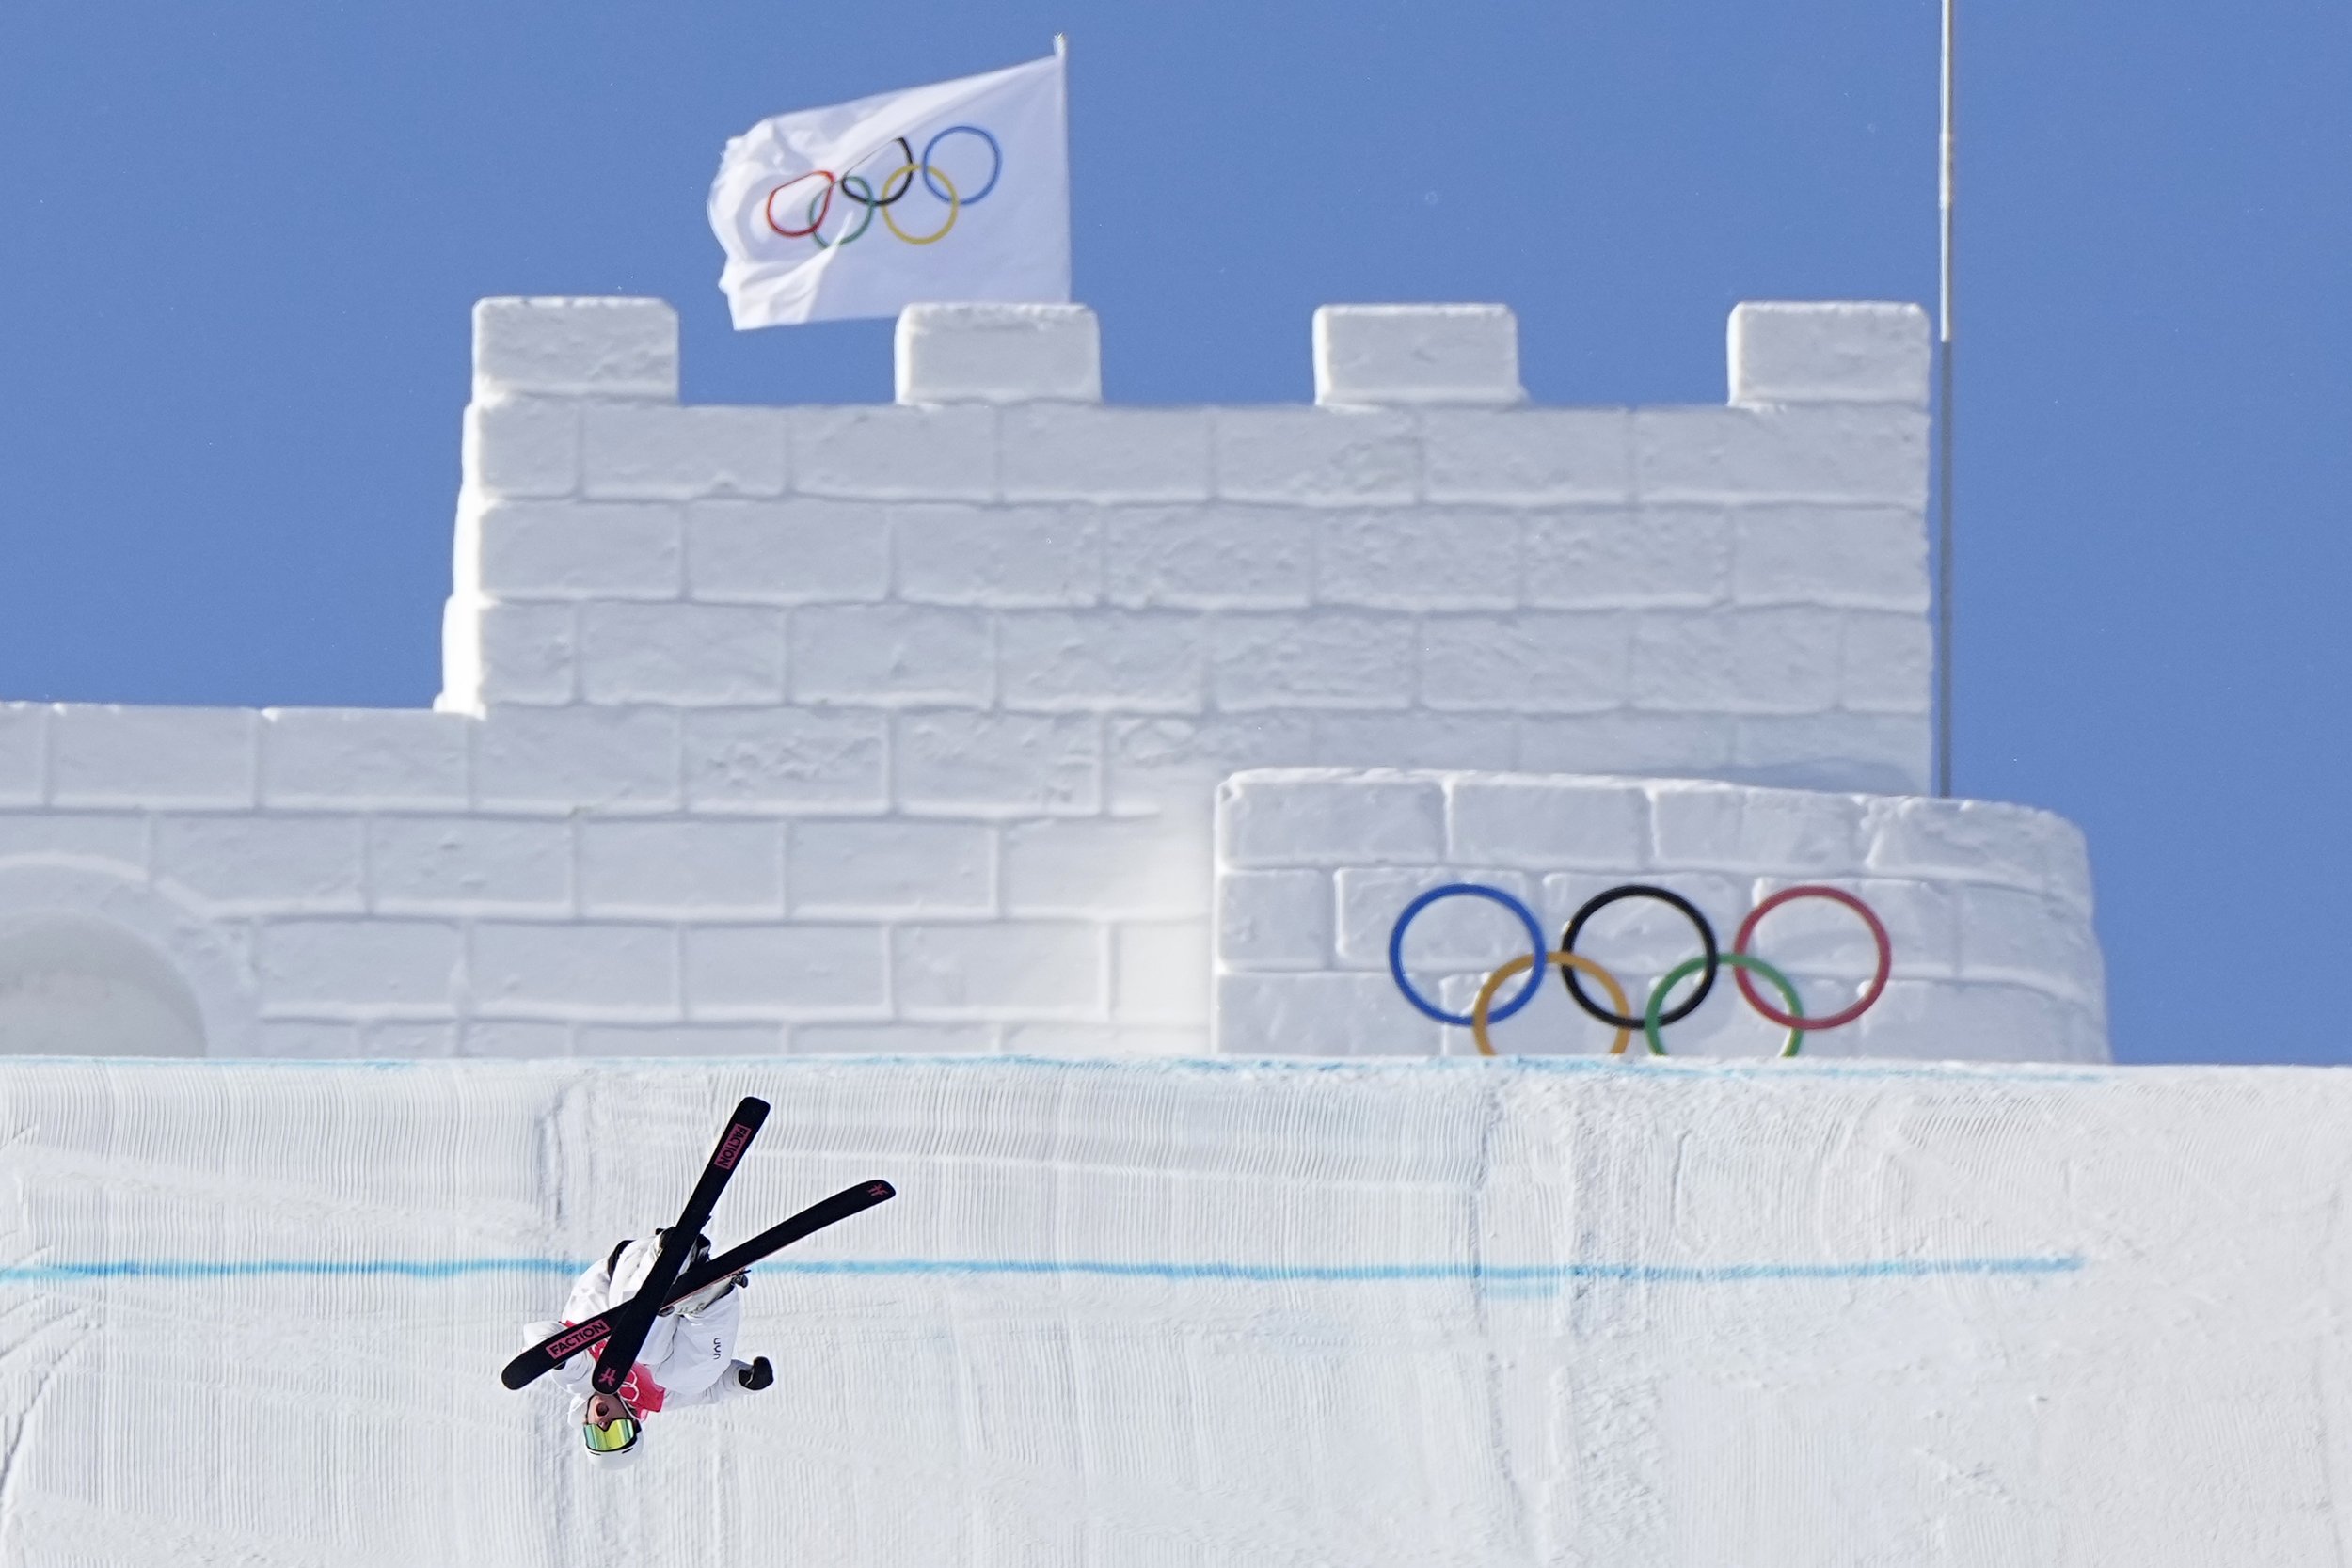  Austria's Matej Svancer competes during the men's slopestyle finals at the 2022 Winter Olympics, Wednesday, Feb. 16, 2022, in Zhangjiakou, China. (AP Photo/Gregory Bull) 